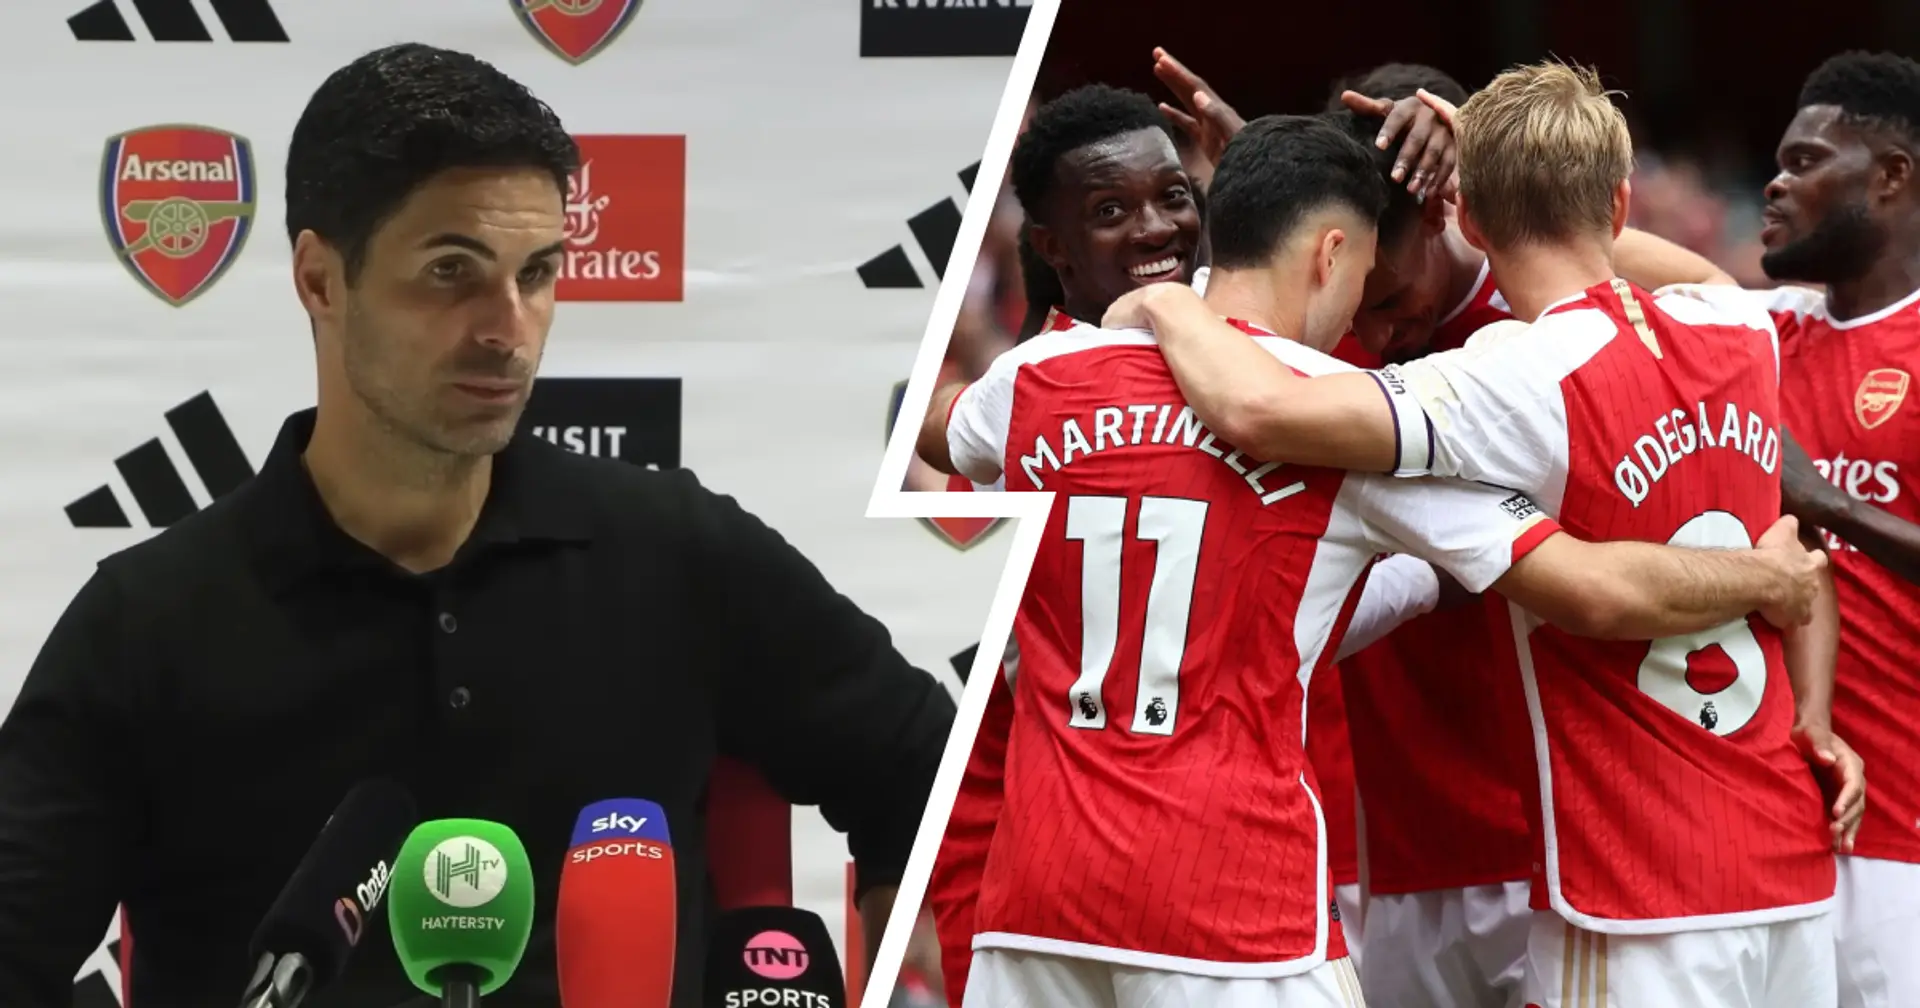 Mikel Arteta names one Arsenal 'role model' after Forest win — it's not Declan Rice on Bukayo Saka